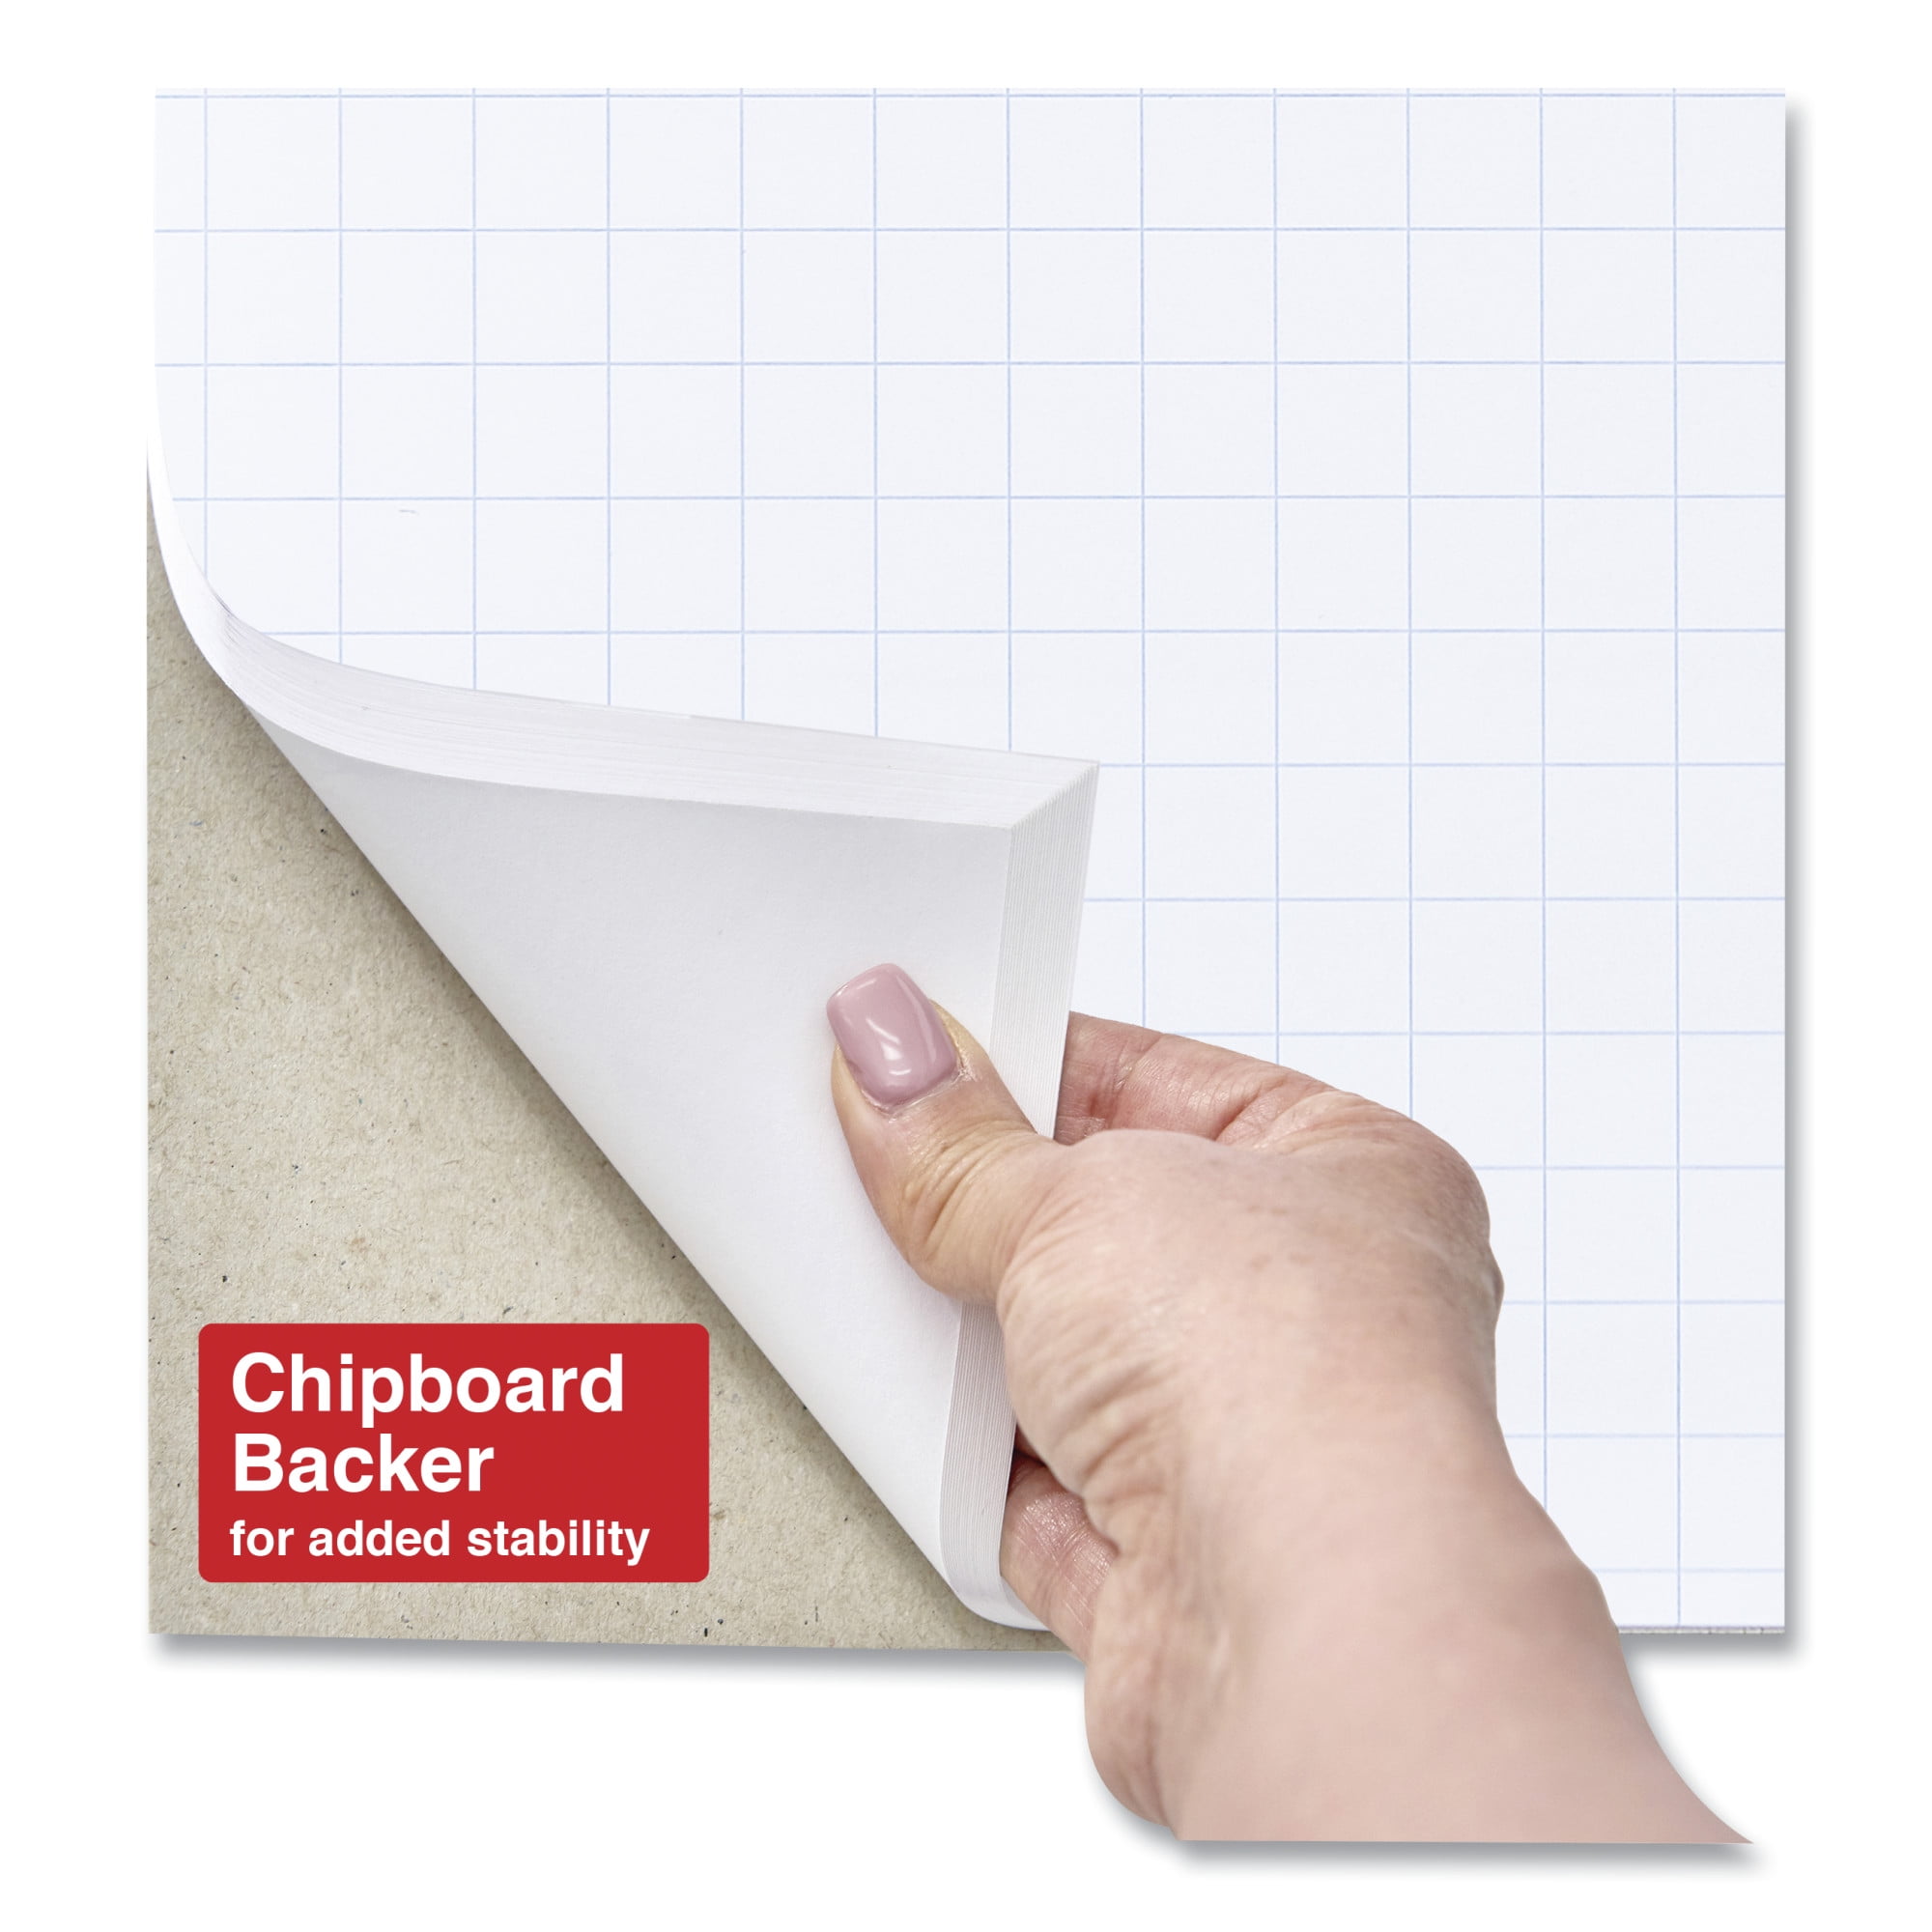 Easel Paper Pad, 2 Pack with 50 Sheets, 17 × 20